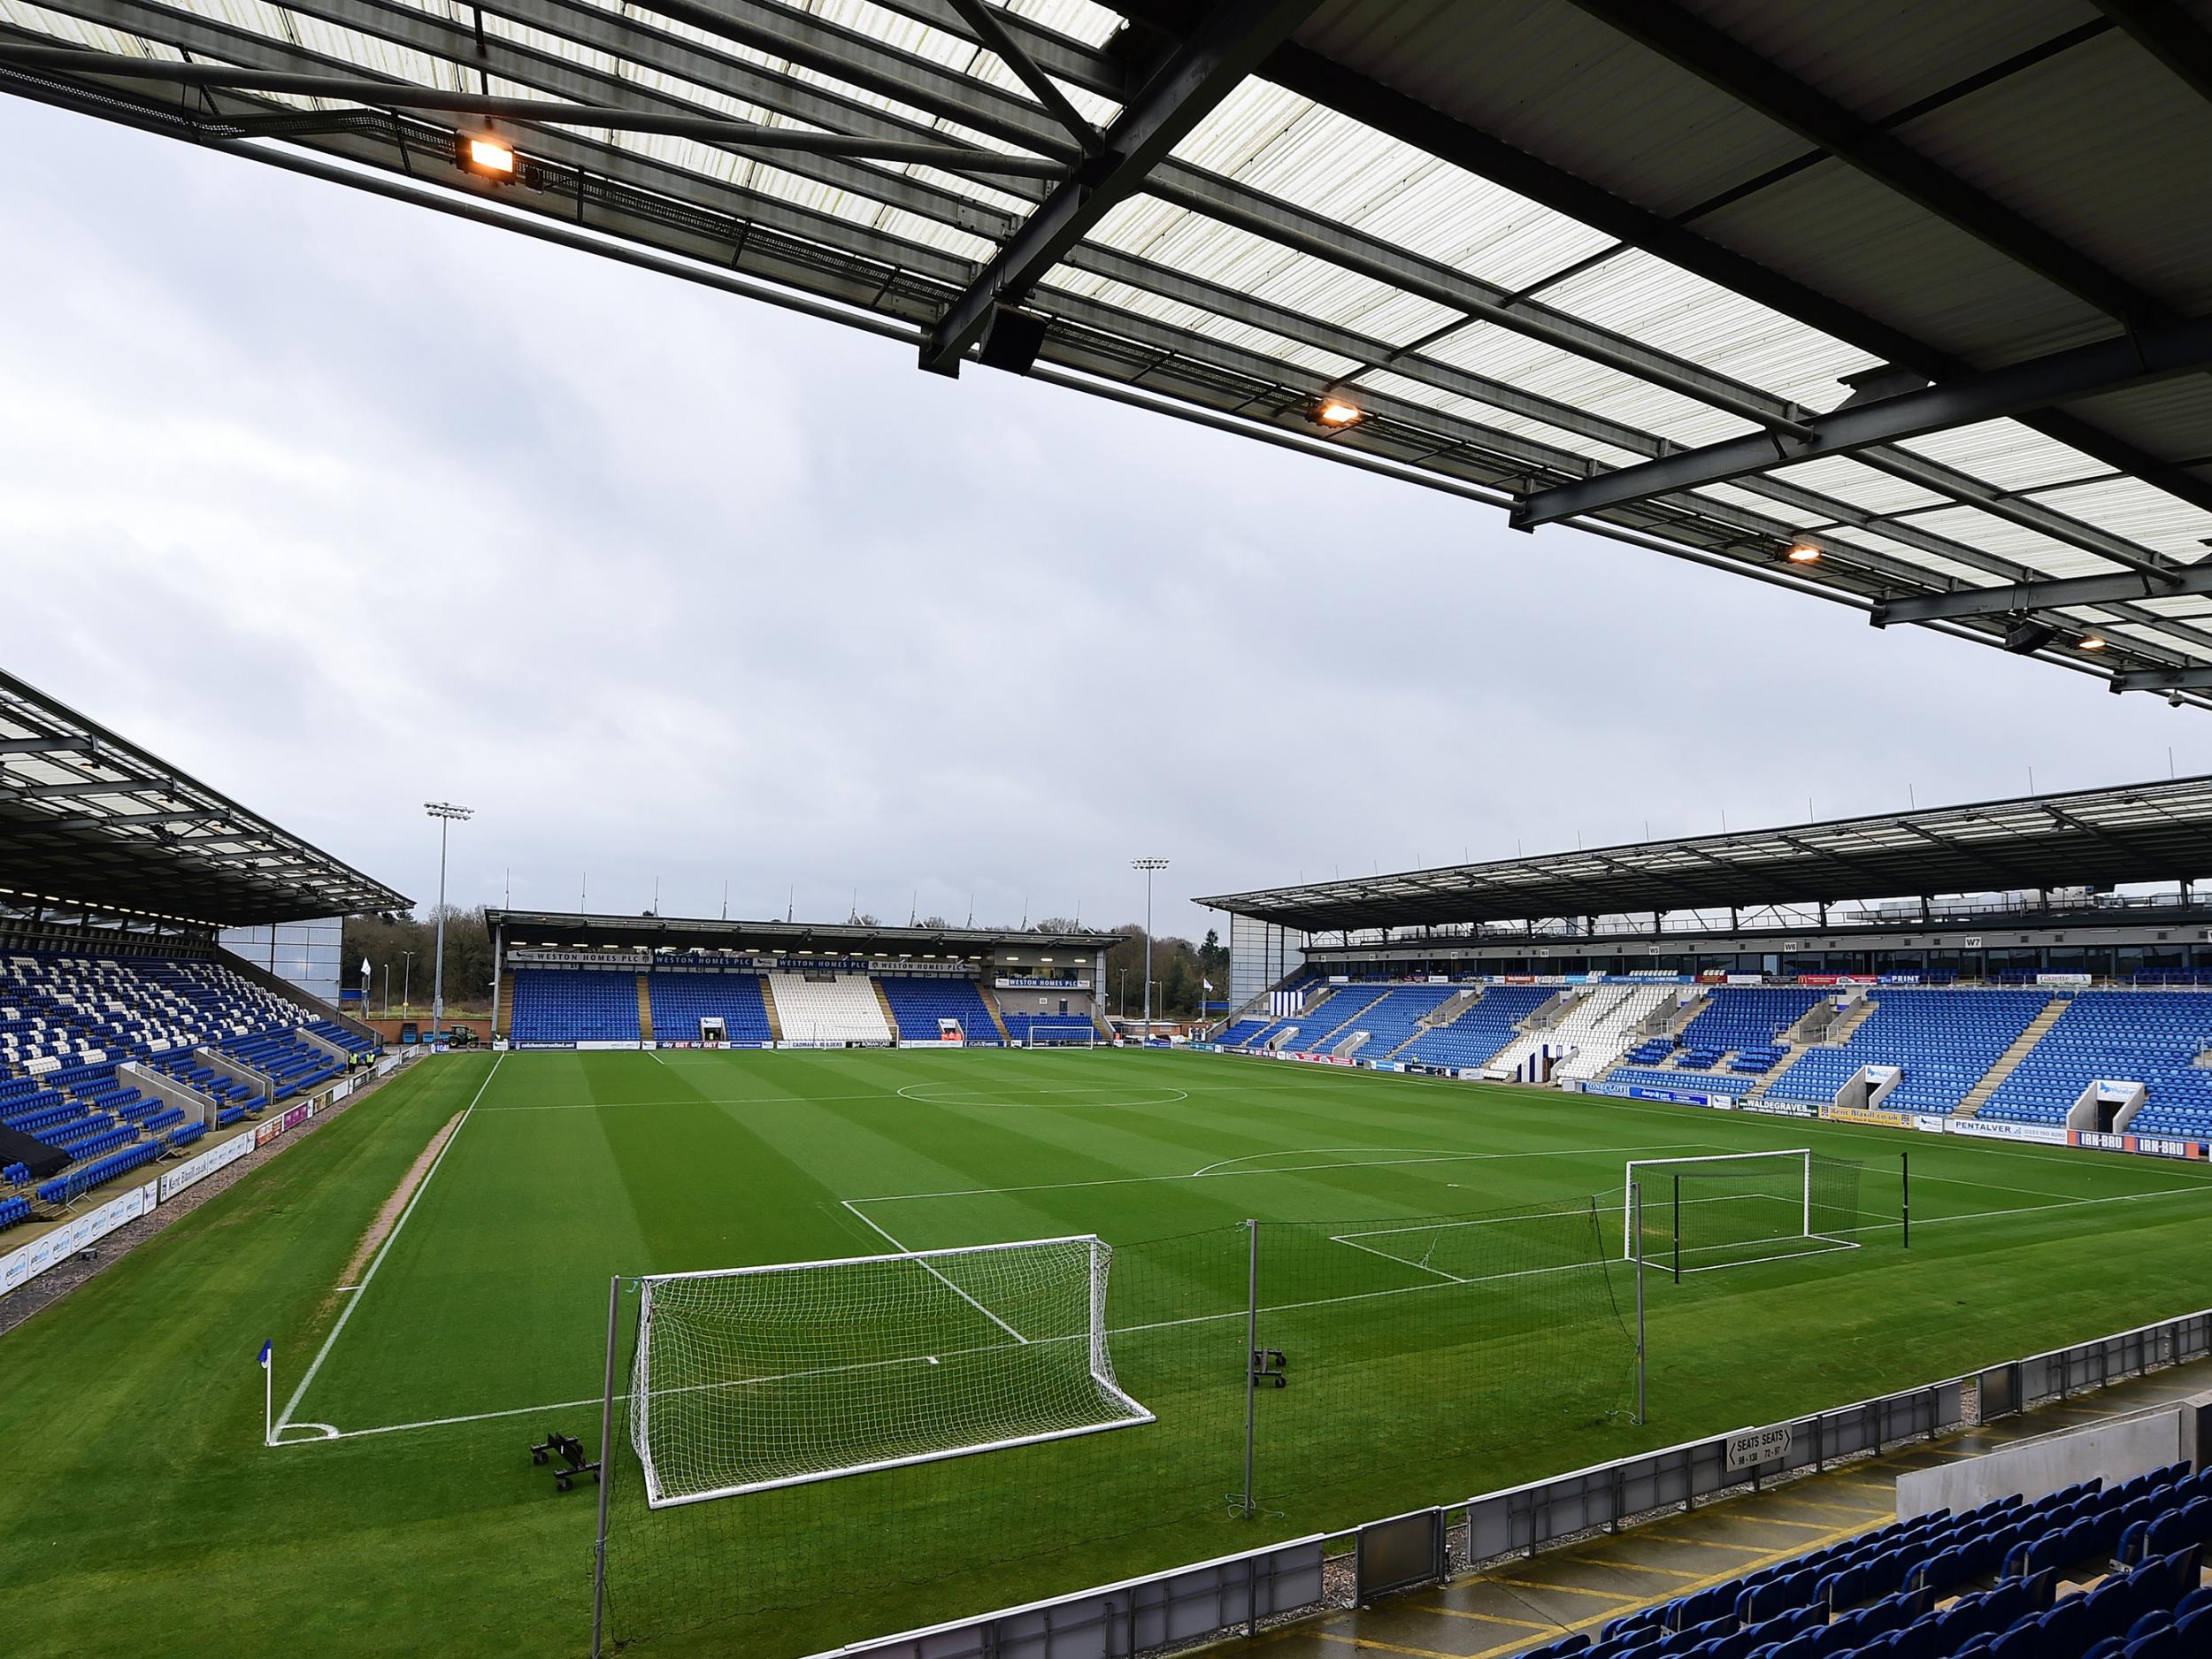 Weston Homes Community Stadium, the home of Colchester United